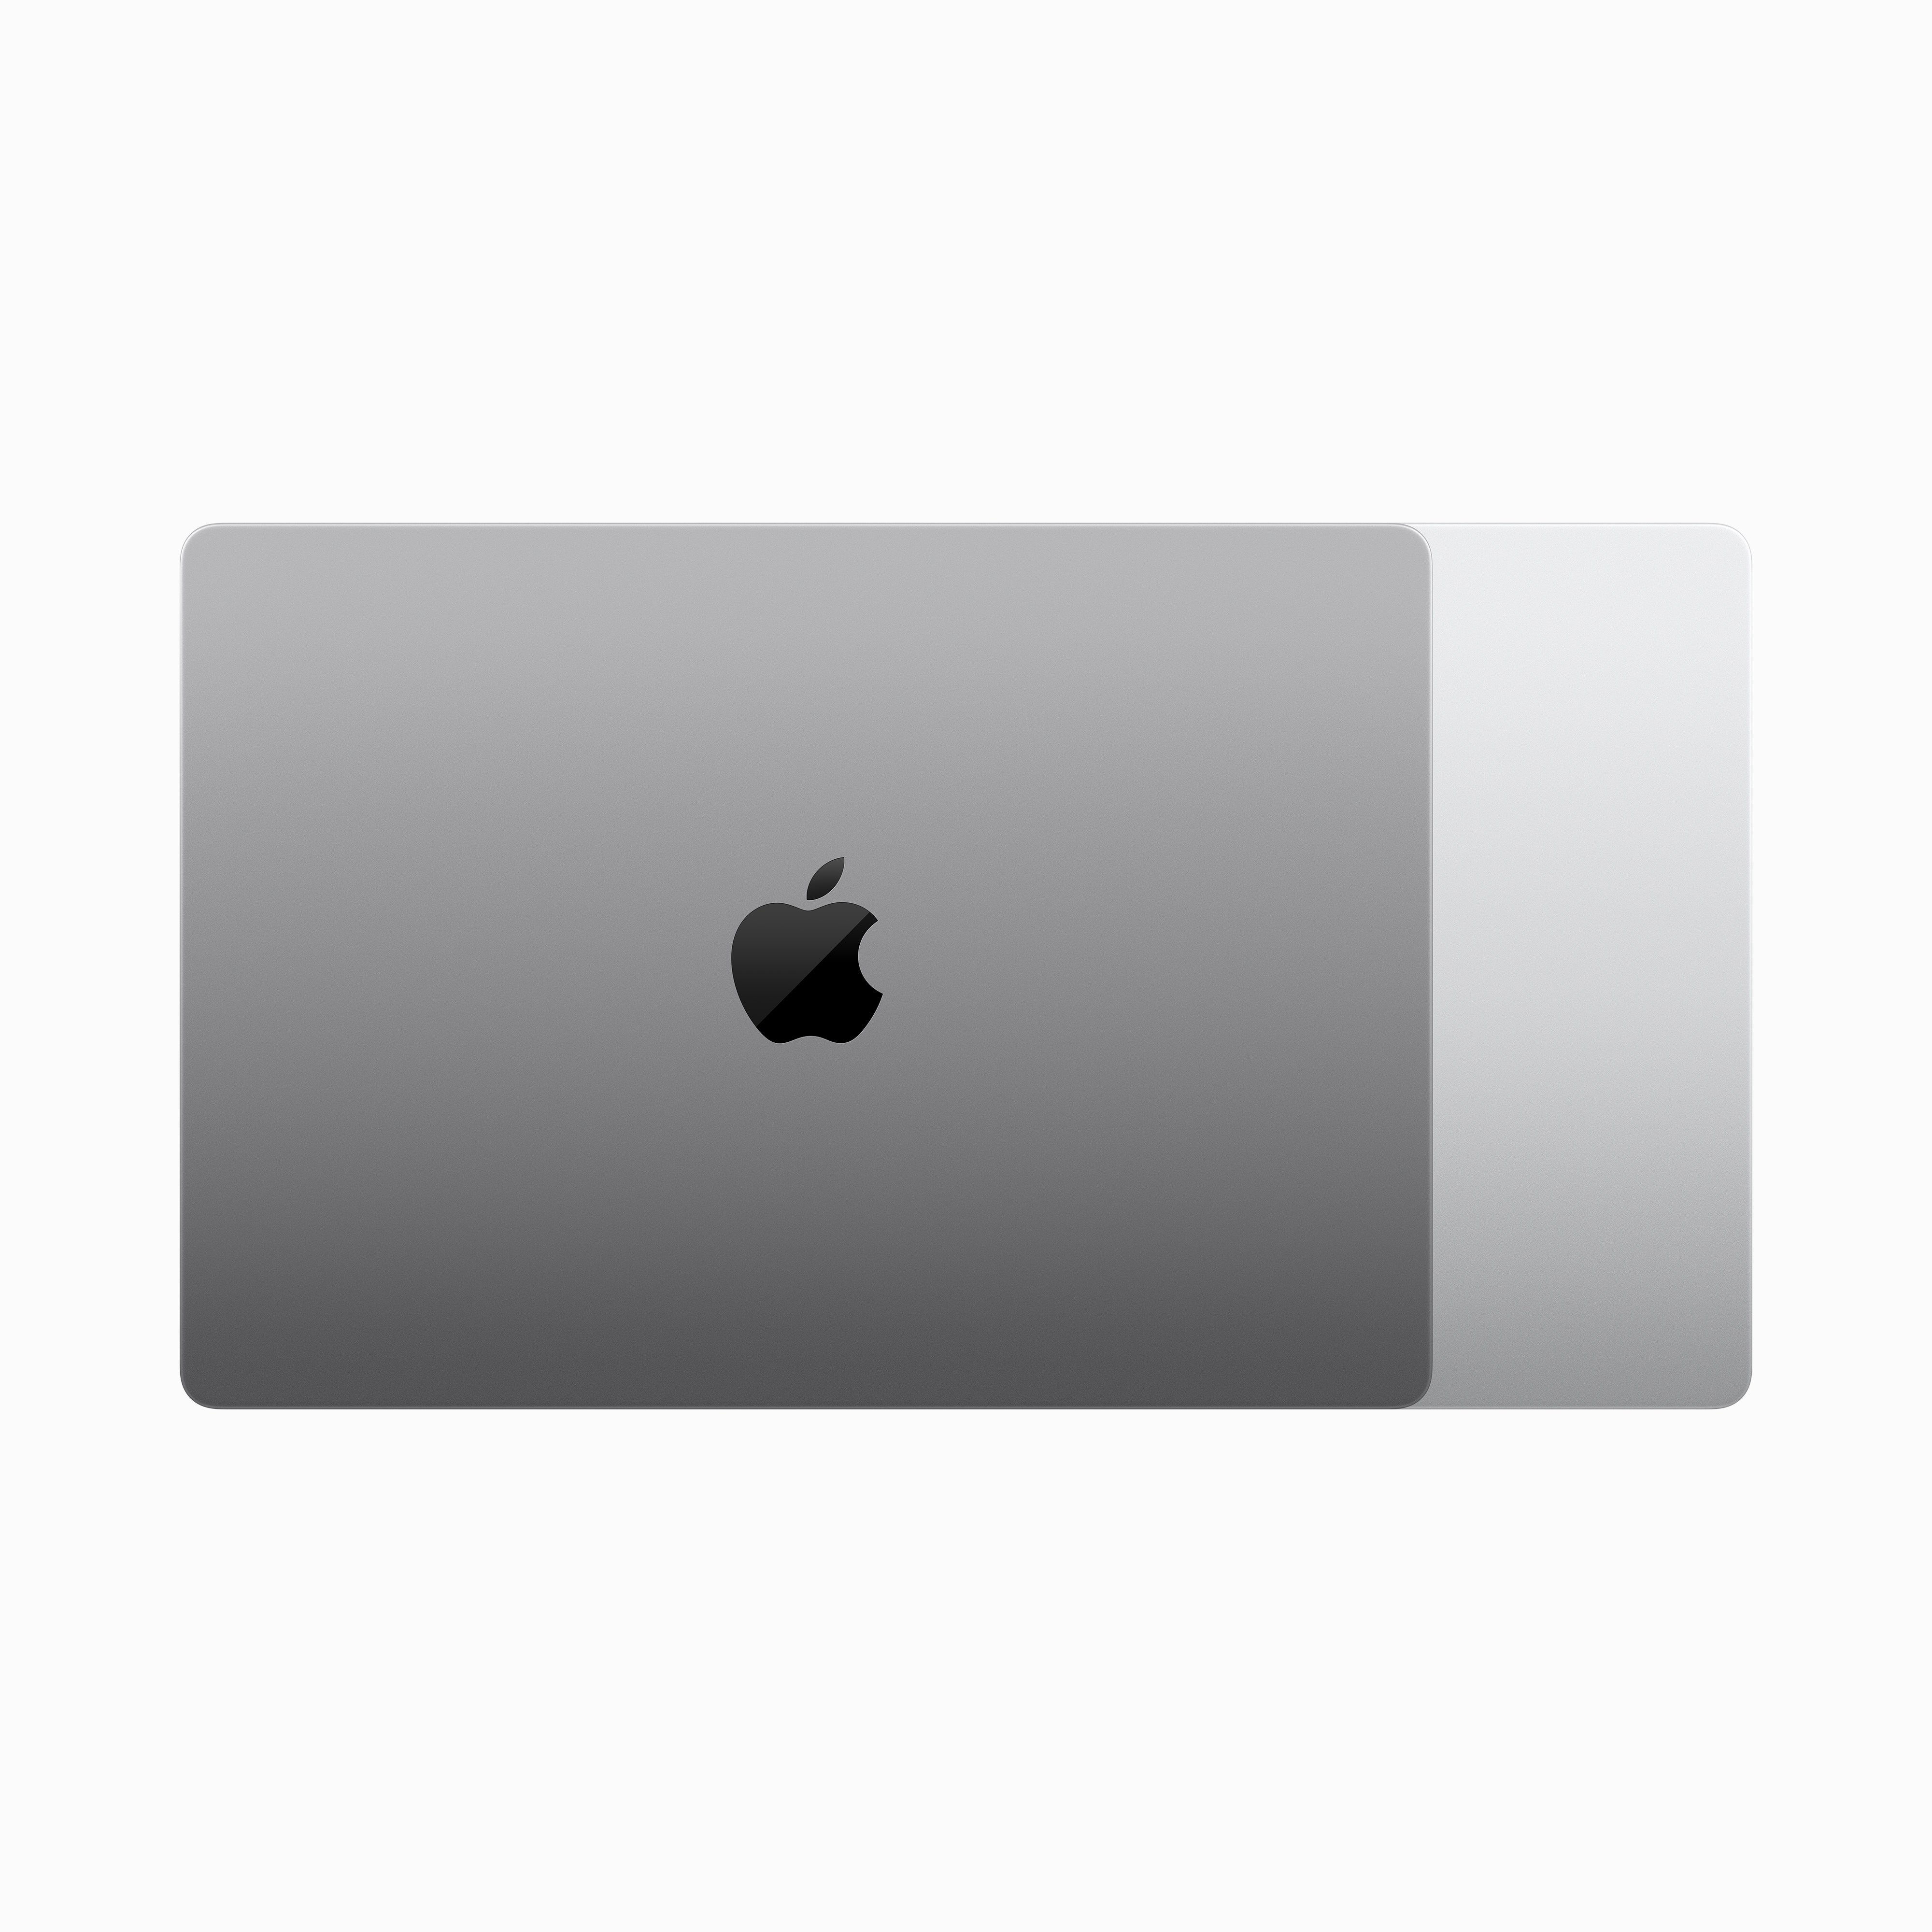 14-inch MacBook Pro: Apple M3 chip with 8C CPU and 10C GPU, 512GB SSD - Silver